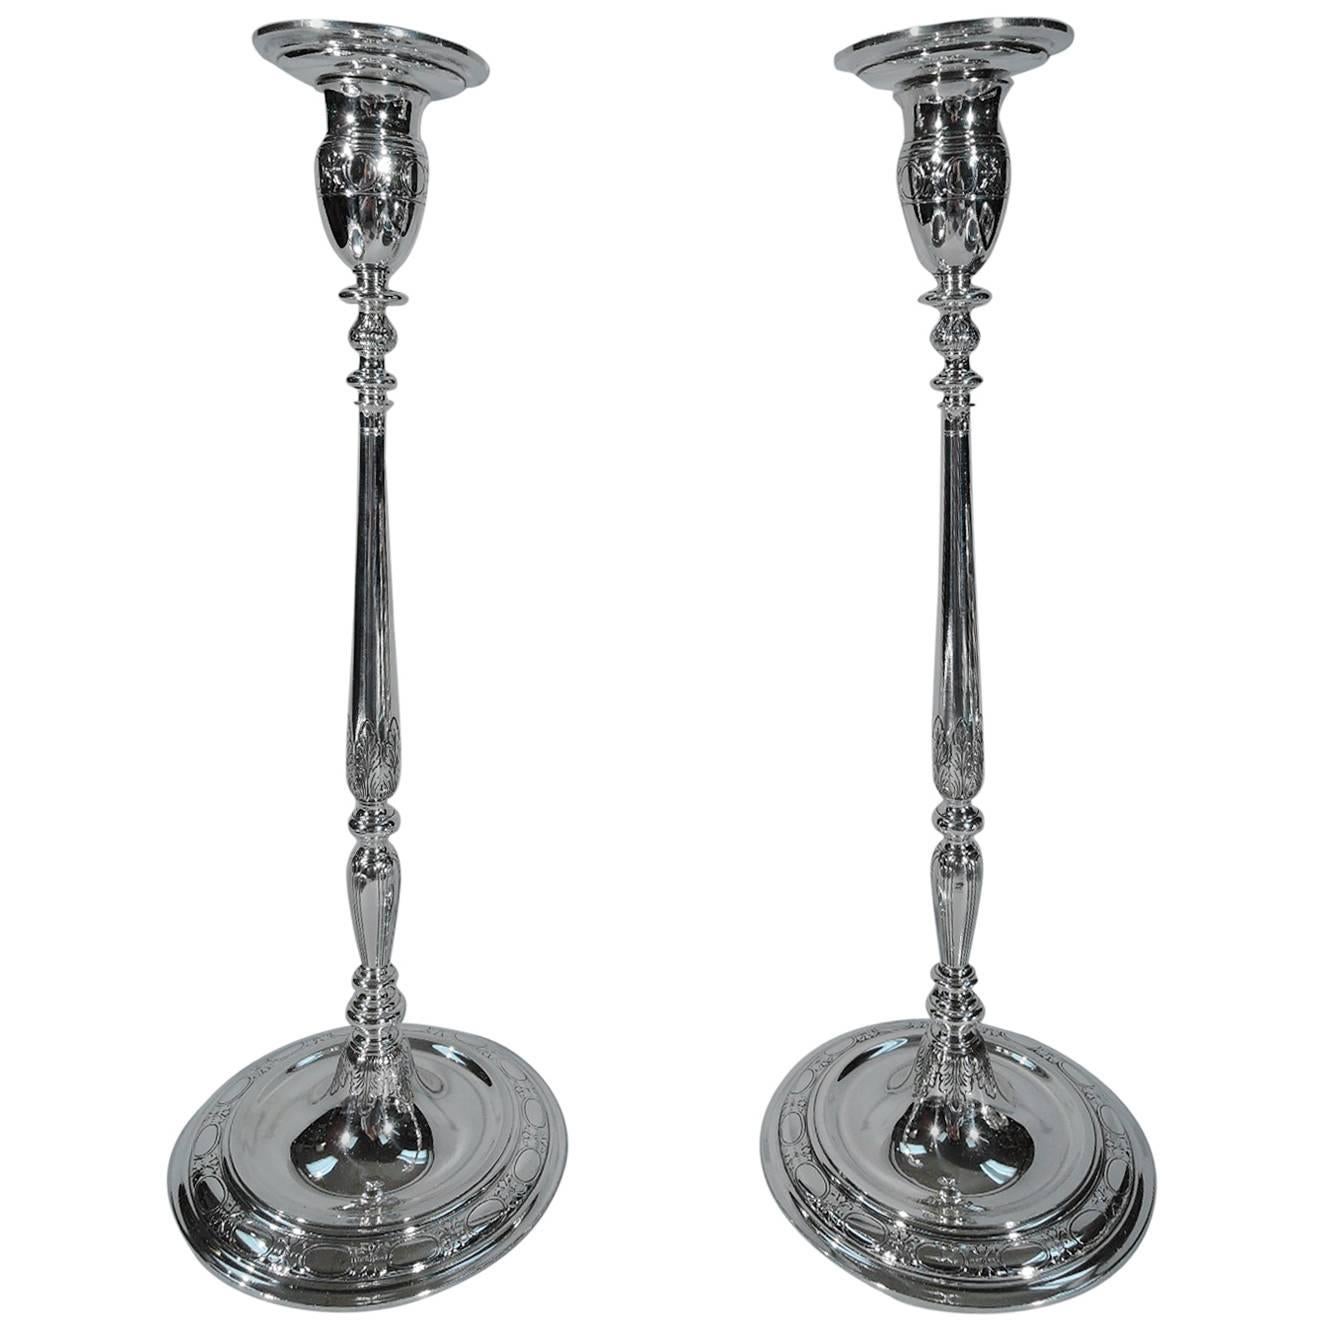 Unusual Tall and Modern Sterling Silver Candlesticks by Tiffany